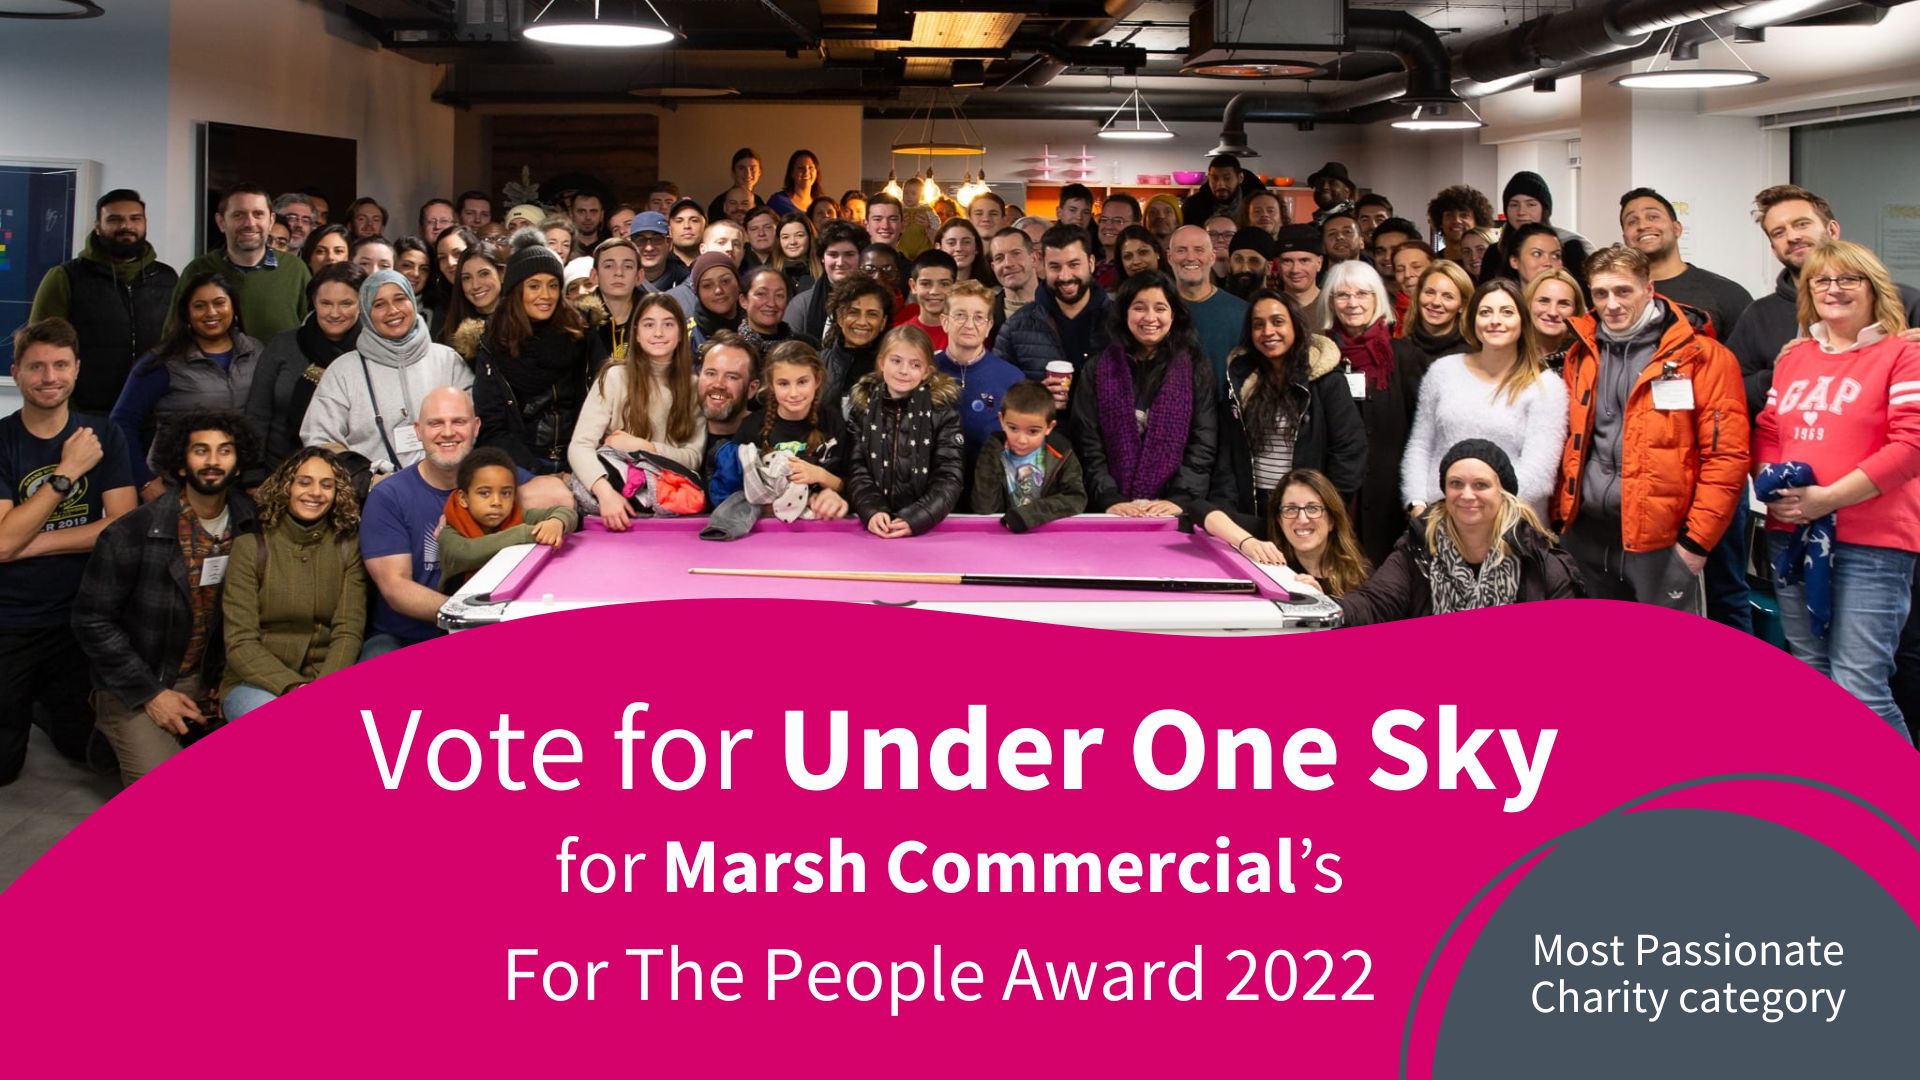 Vote for Under One Sky as Most Passionate Charity 2022!